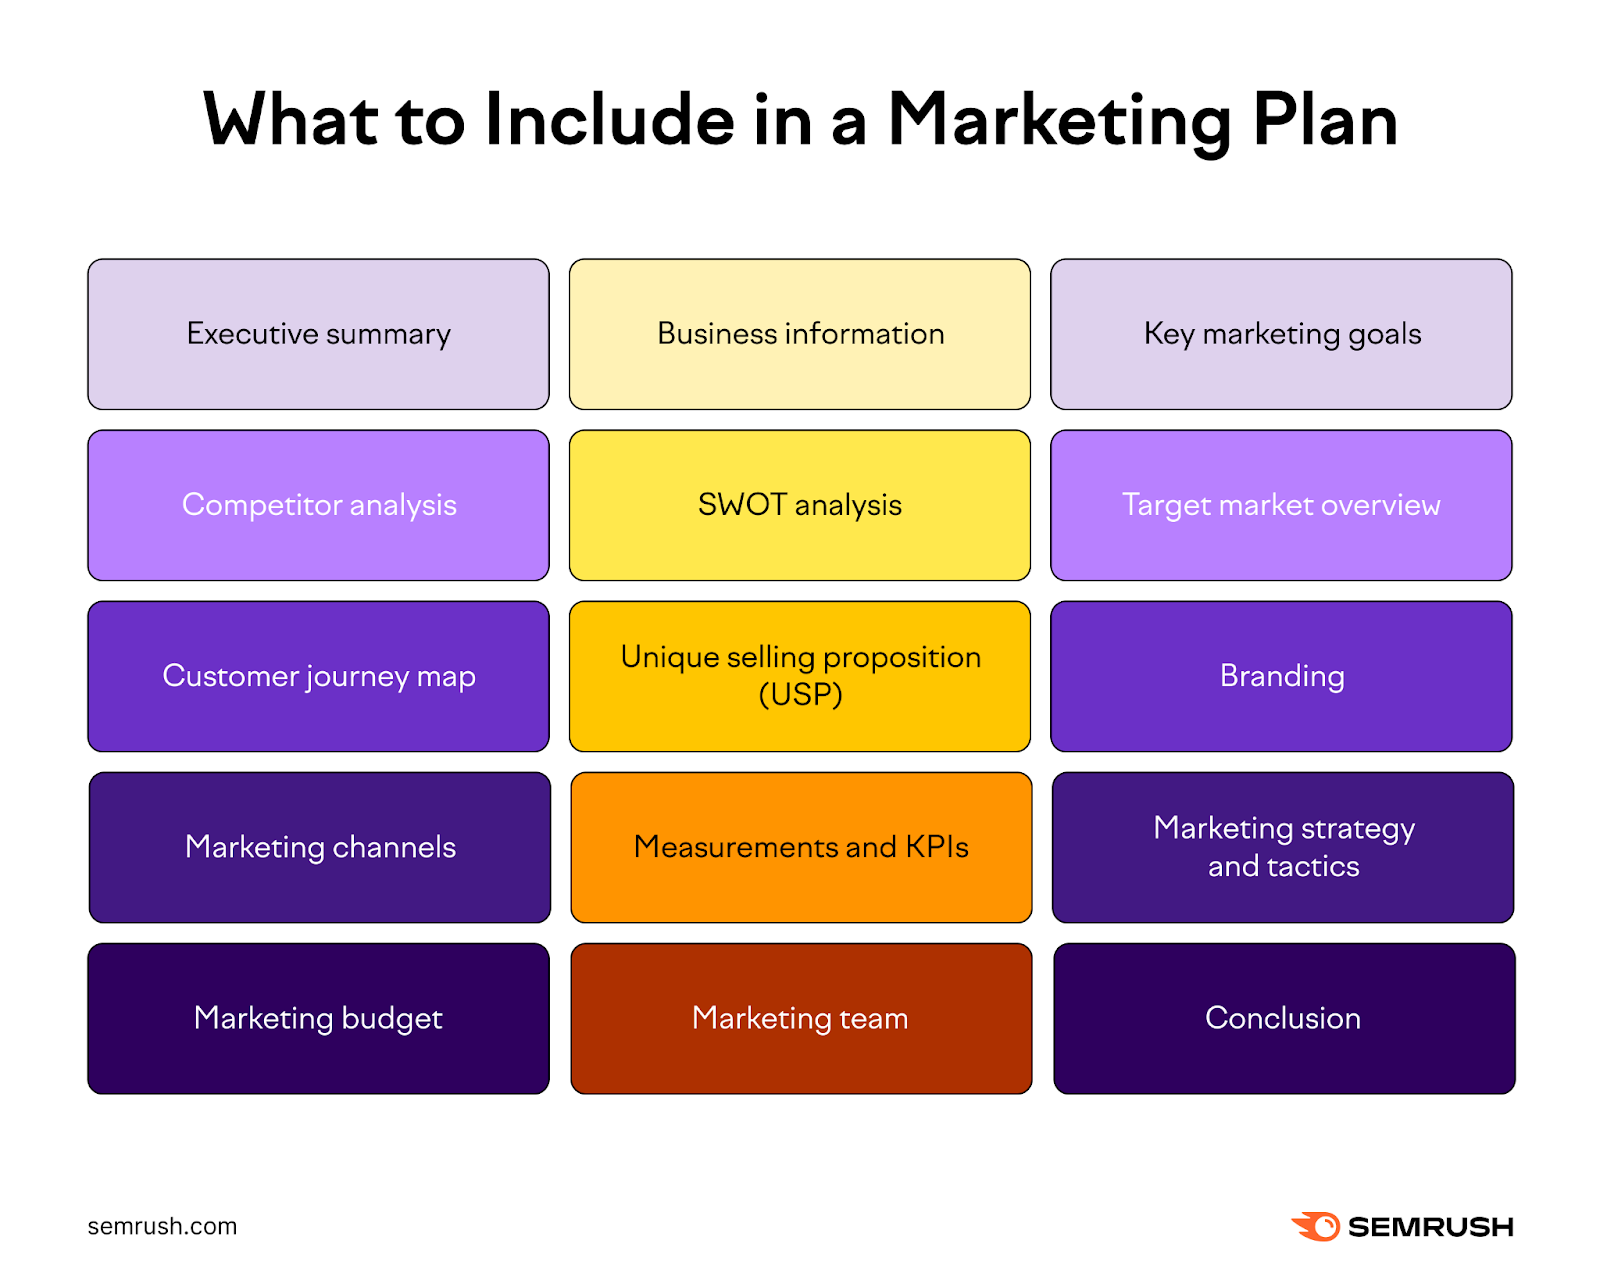 What to include in a marketing plan